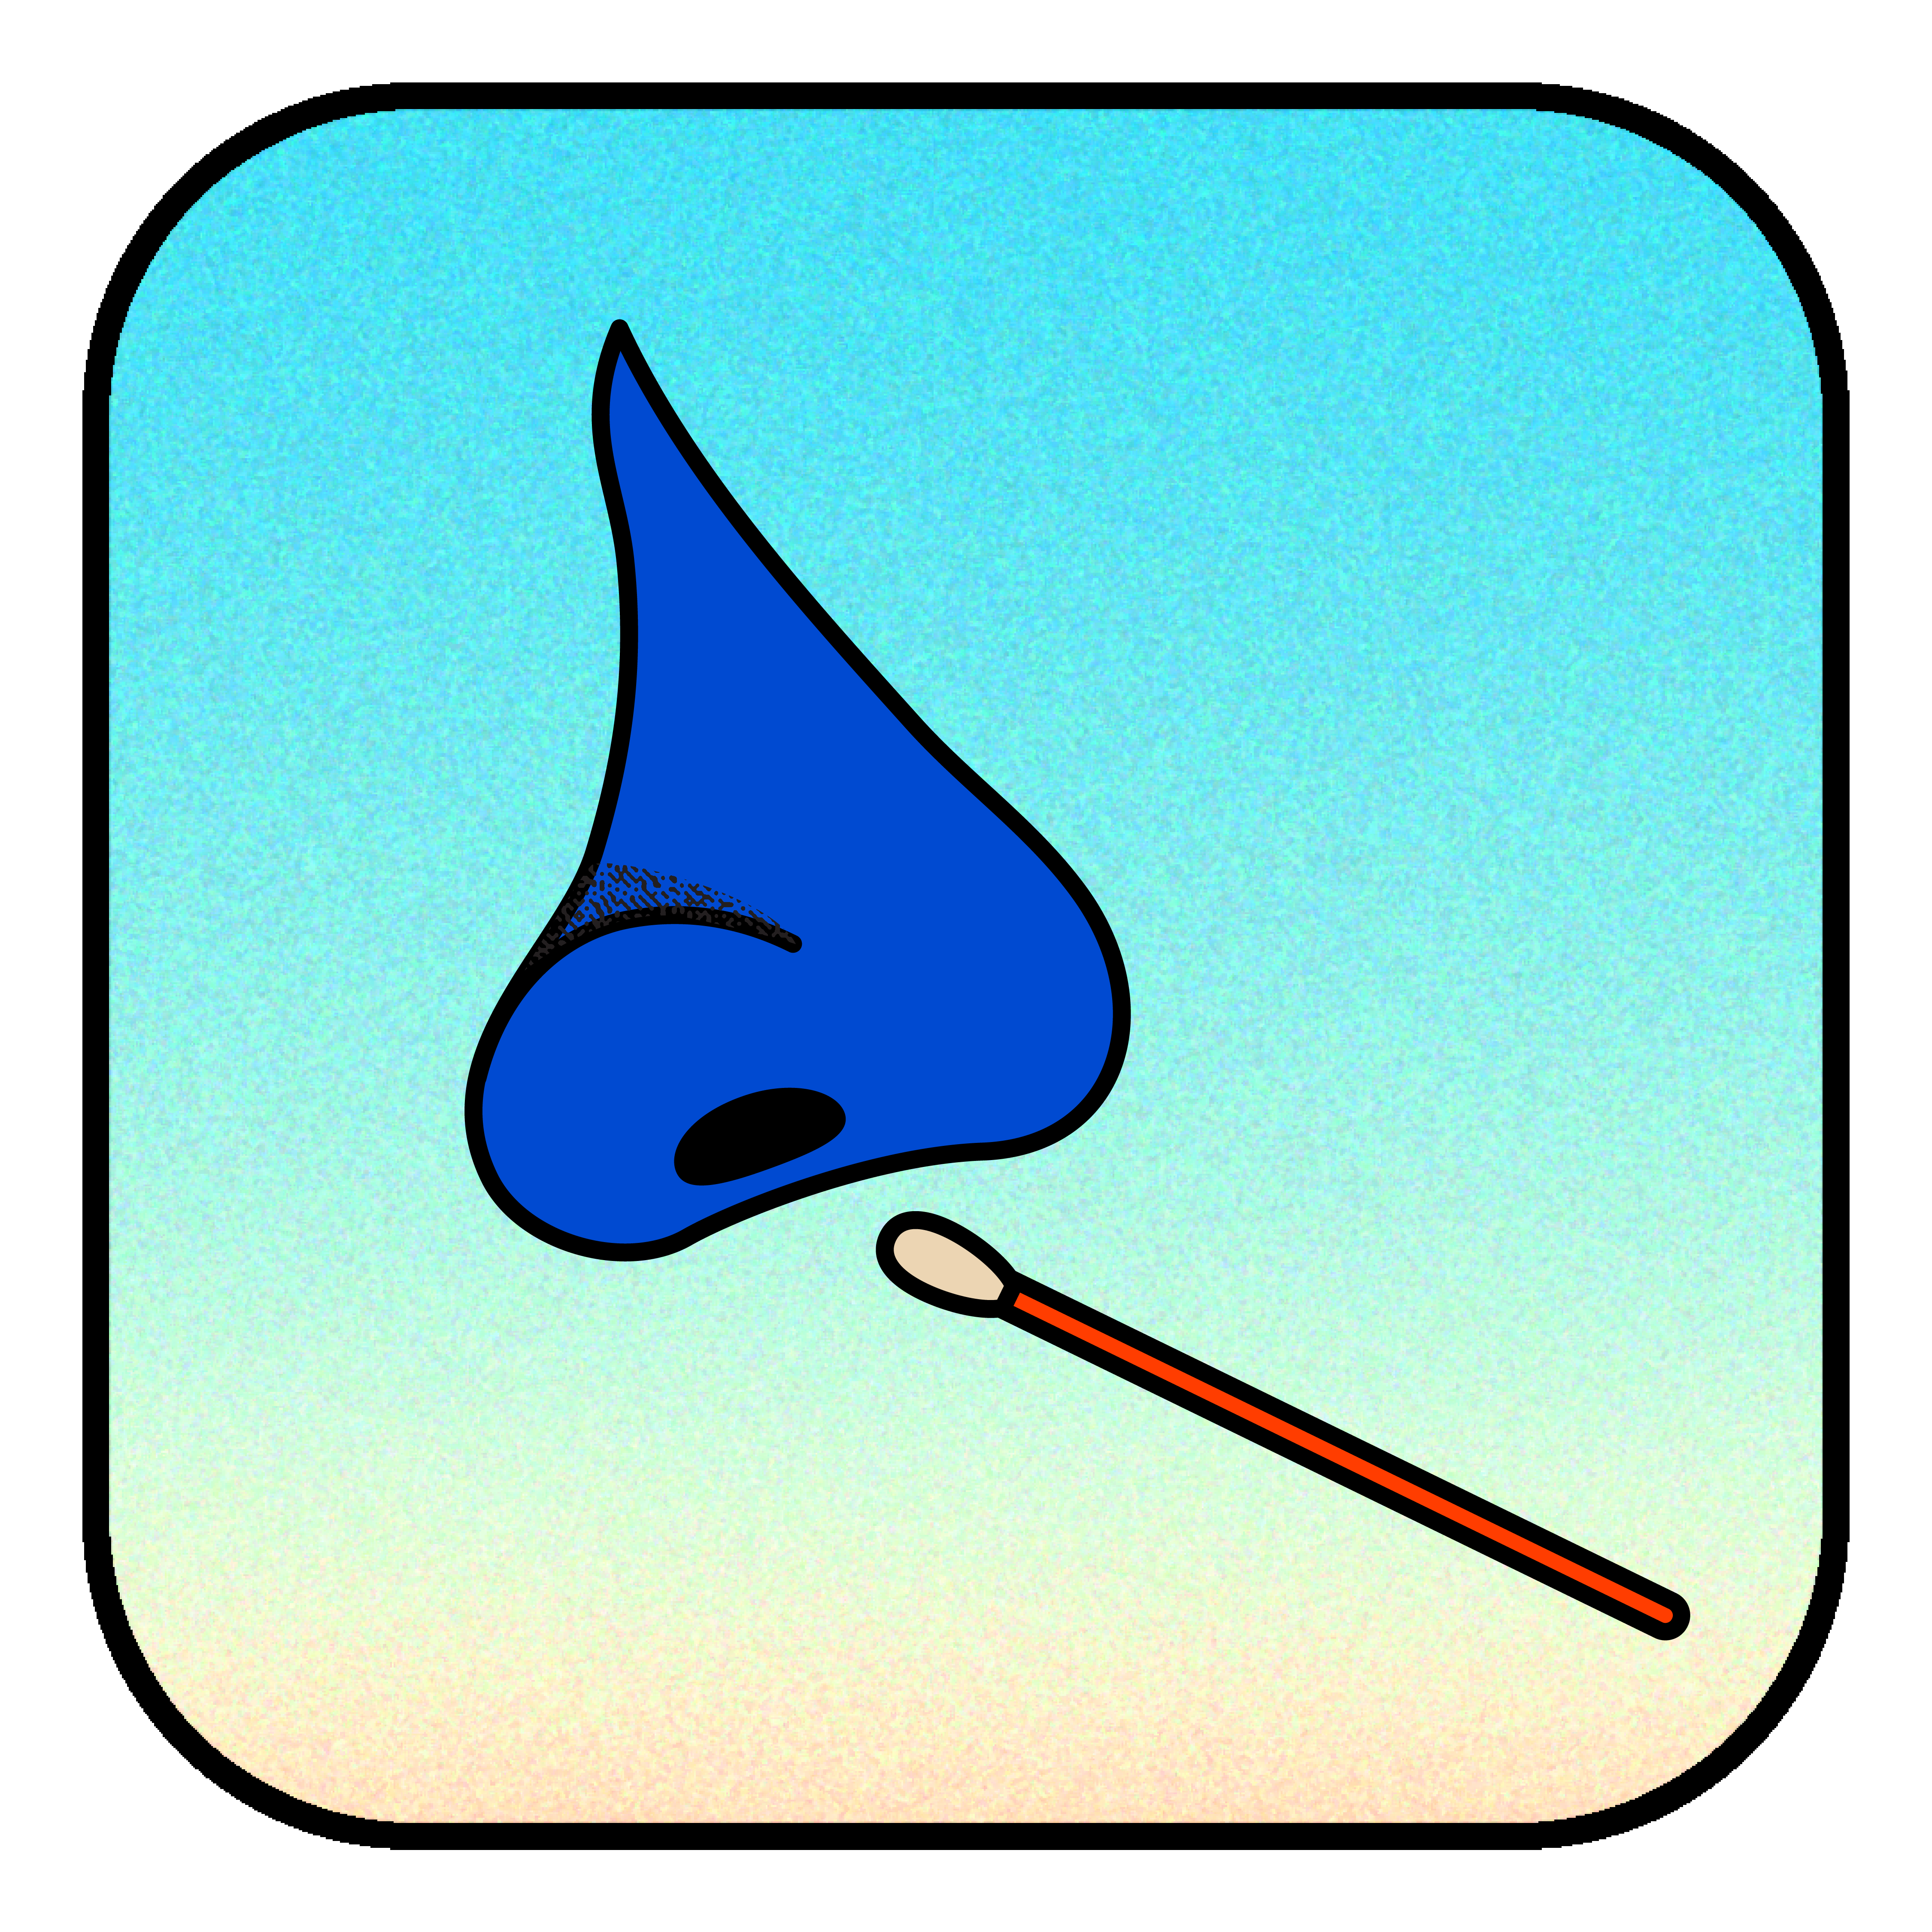 an illustration of a blue nose with a cotton swab about to enter the nostril